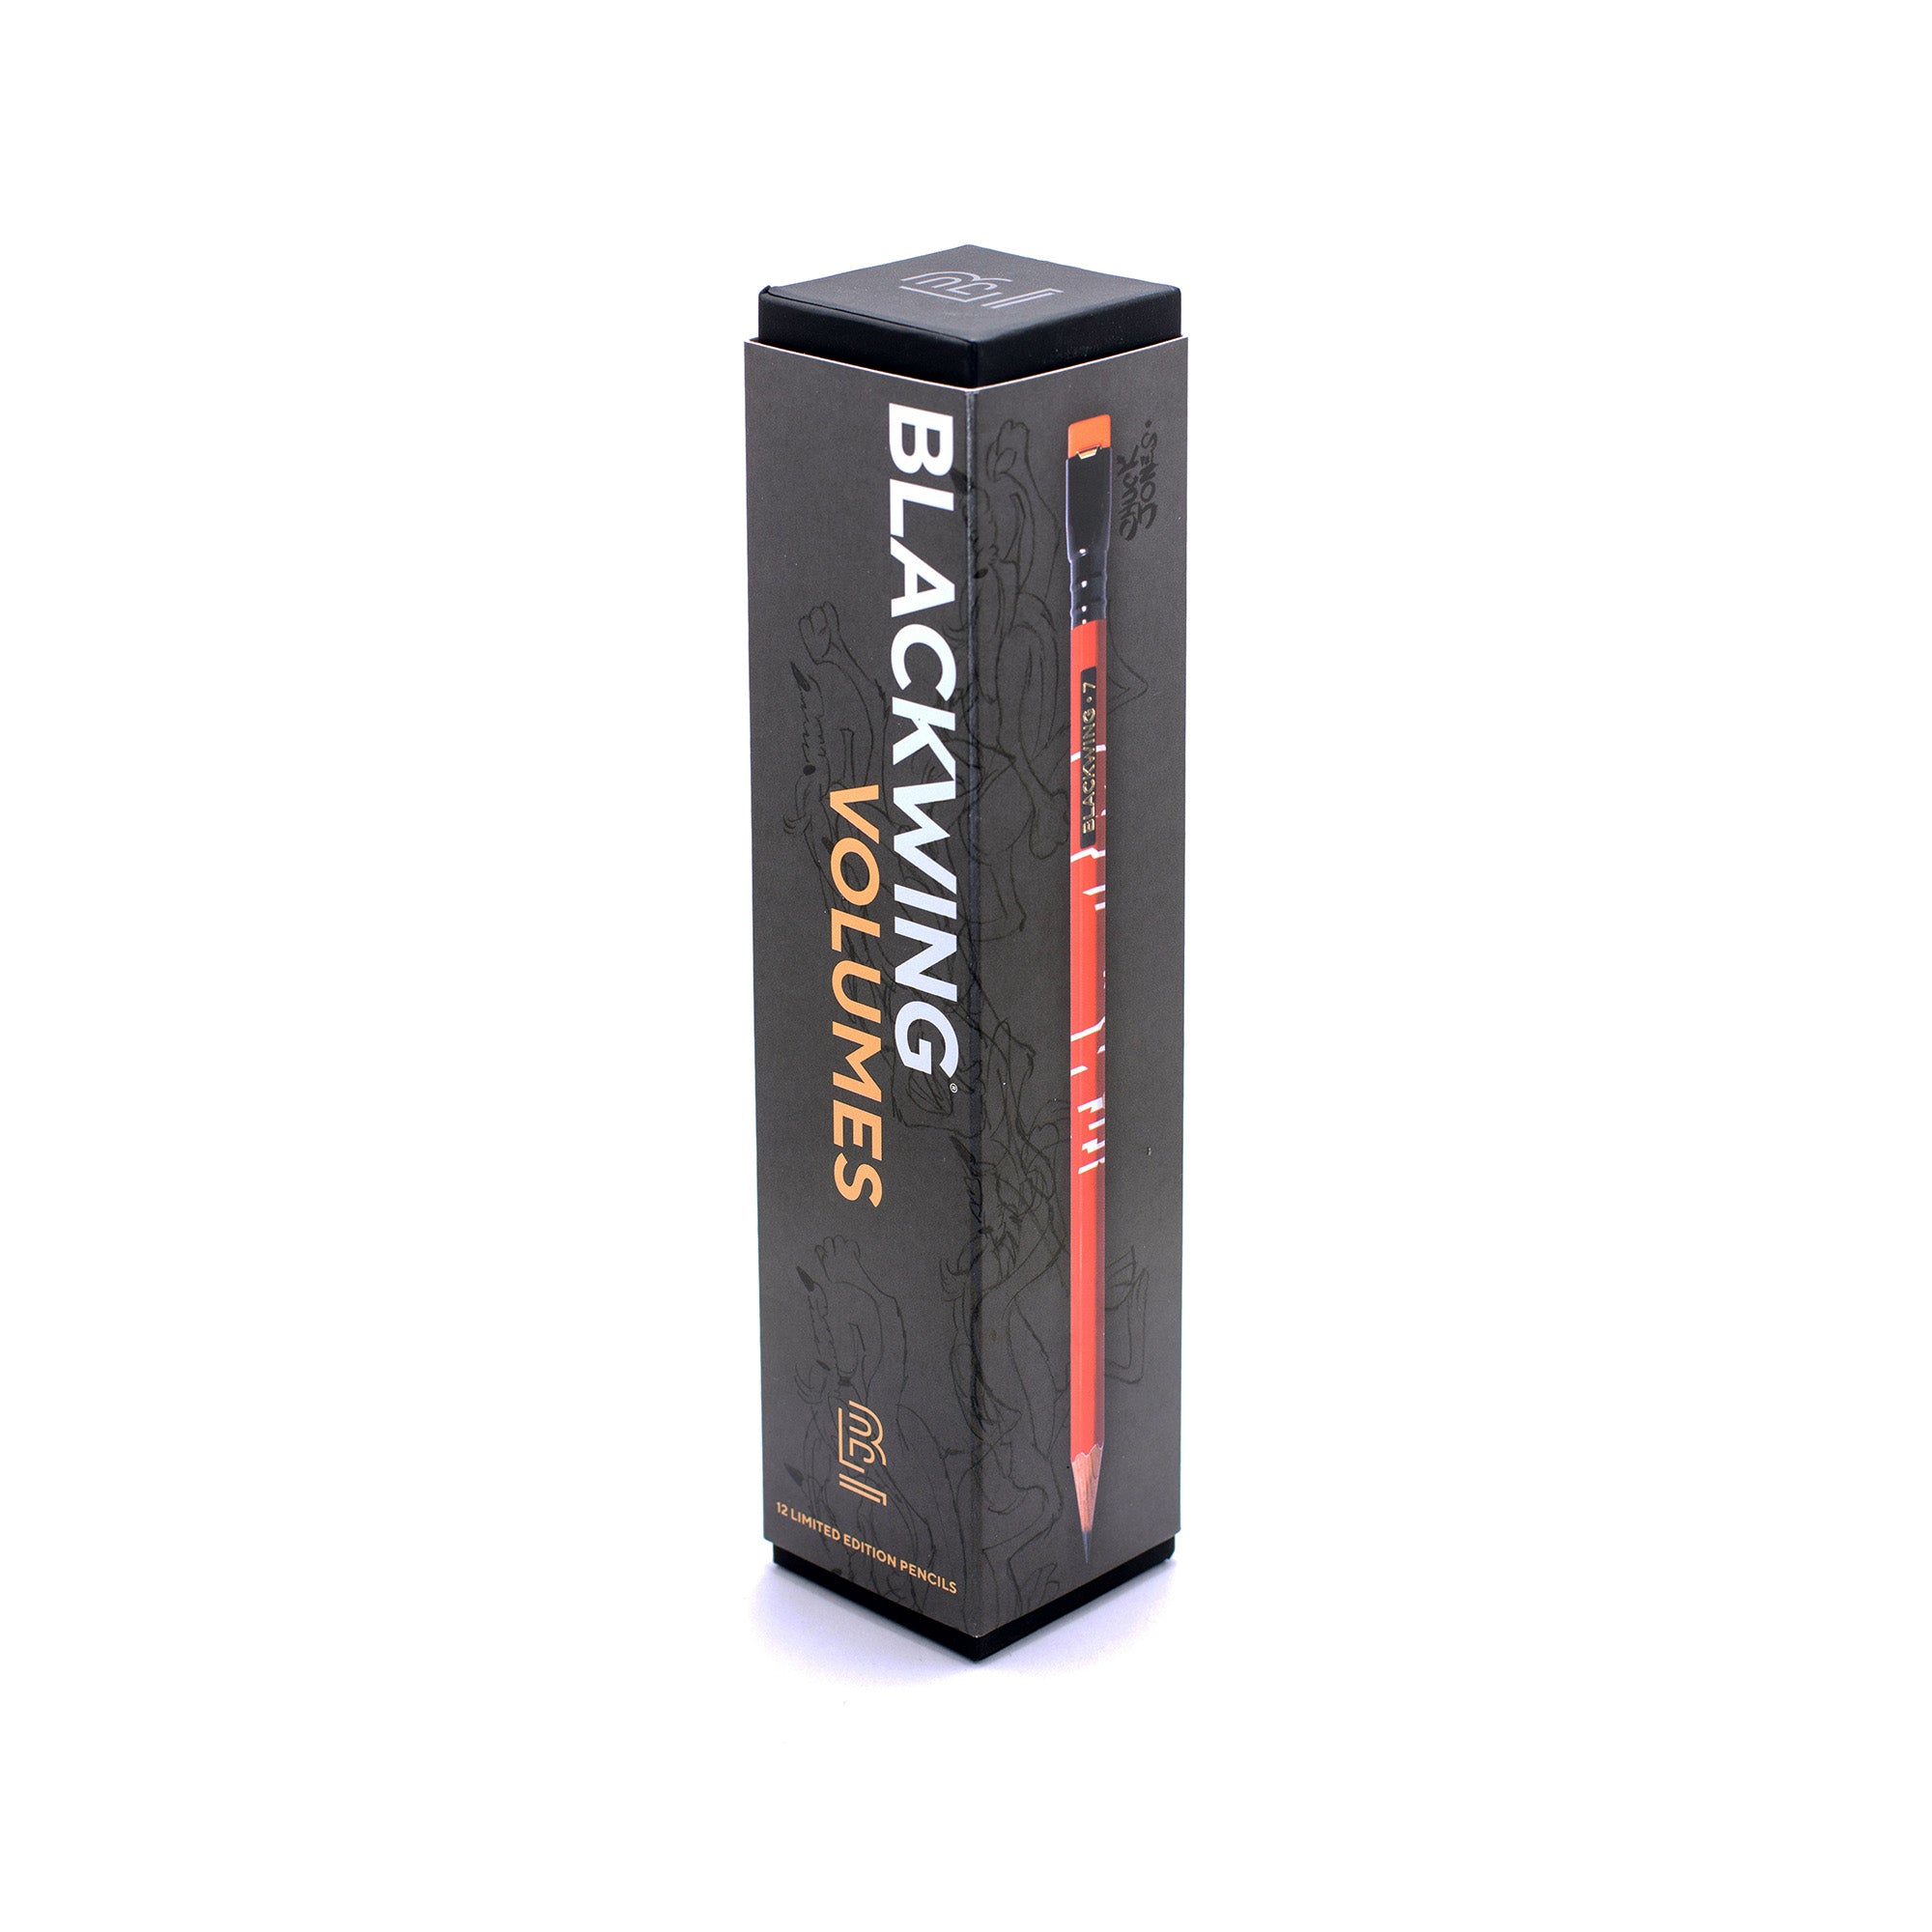 Blackwing Pearl Pencils - 12 Count, High-quality Incense-cedar, Premium  Japanese Graphite, Pearlescent White, Balanced Lead, Great for Journaling  and